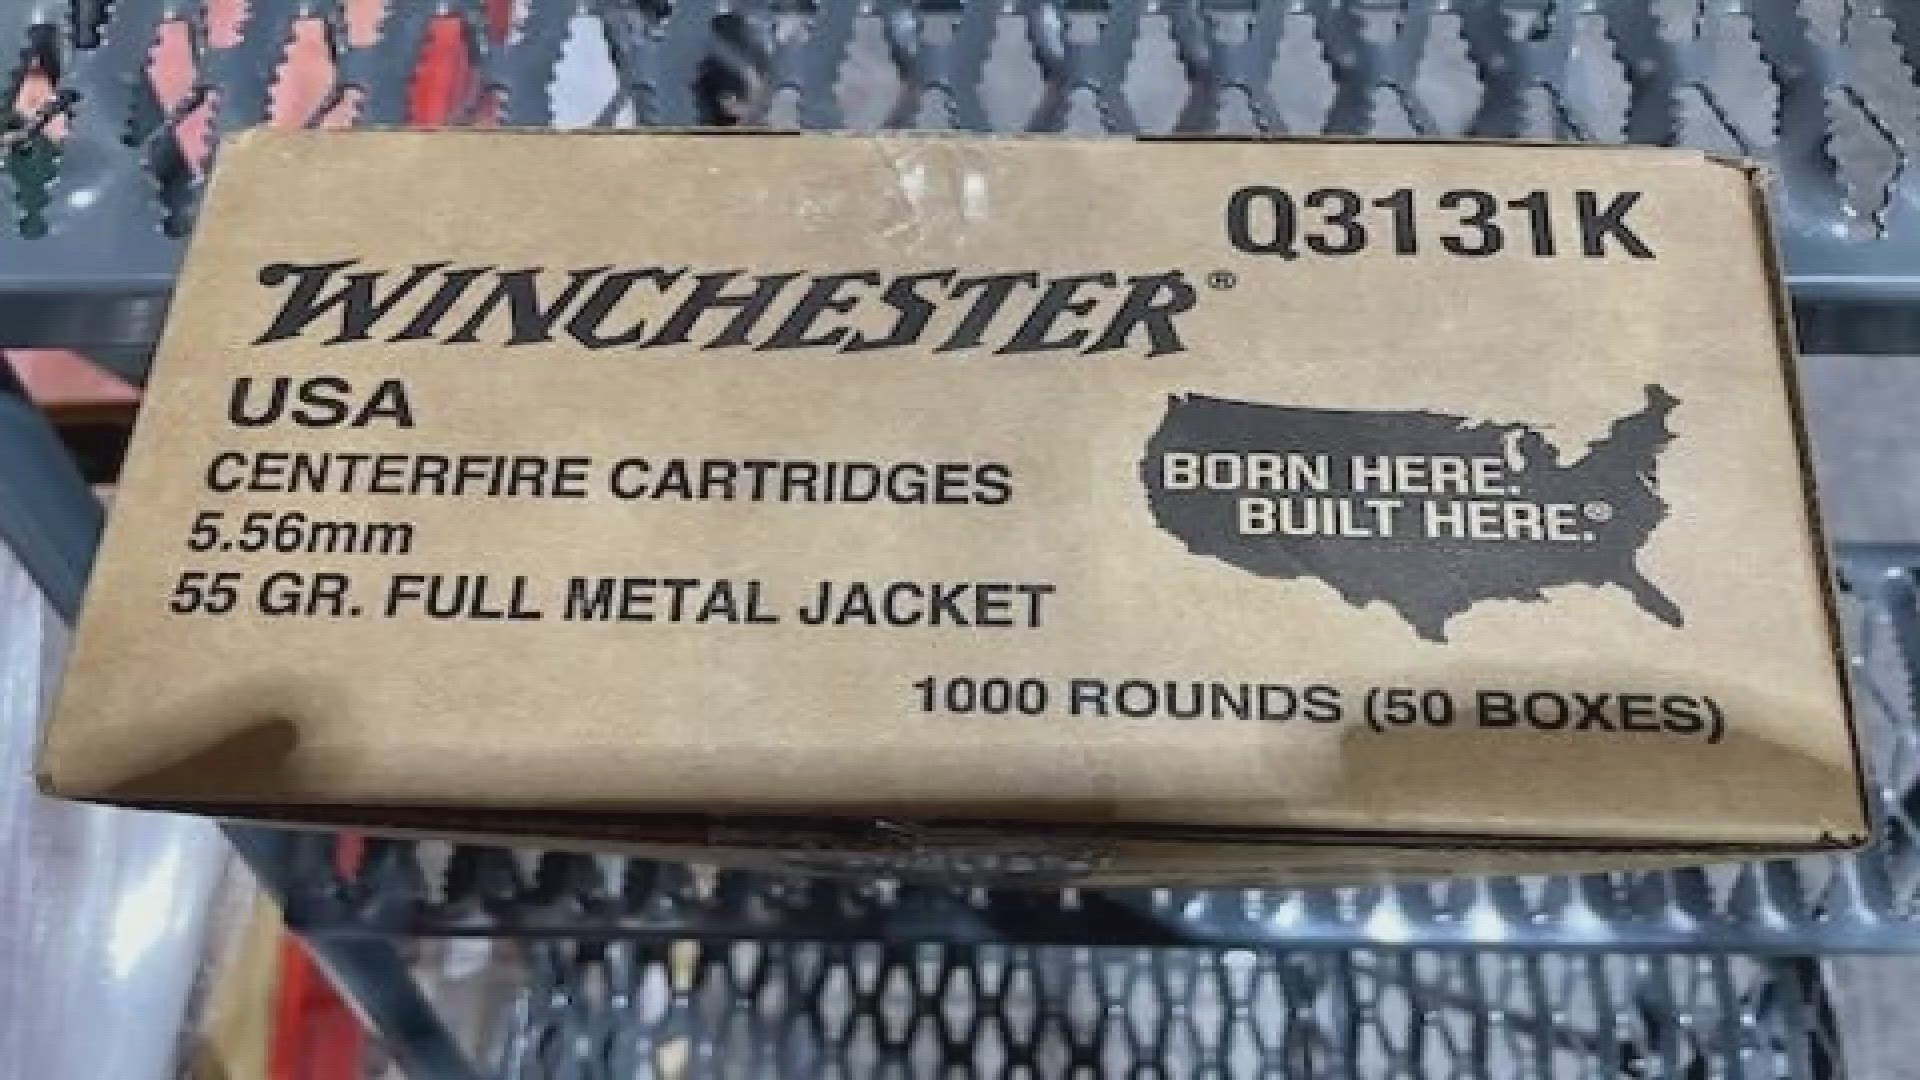 Pallets containing Winchester 5.56 ammo, along with a delivery truck, were stolen on April 1 from the Westbelt neighborhood of Columbus.